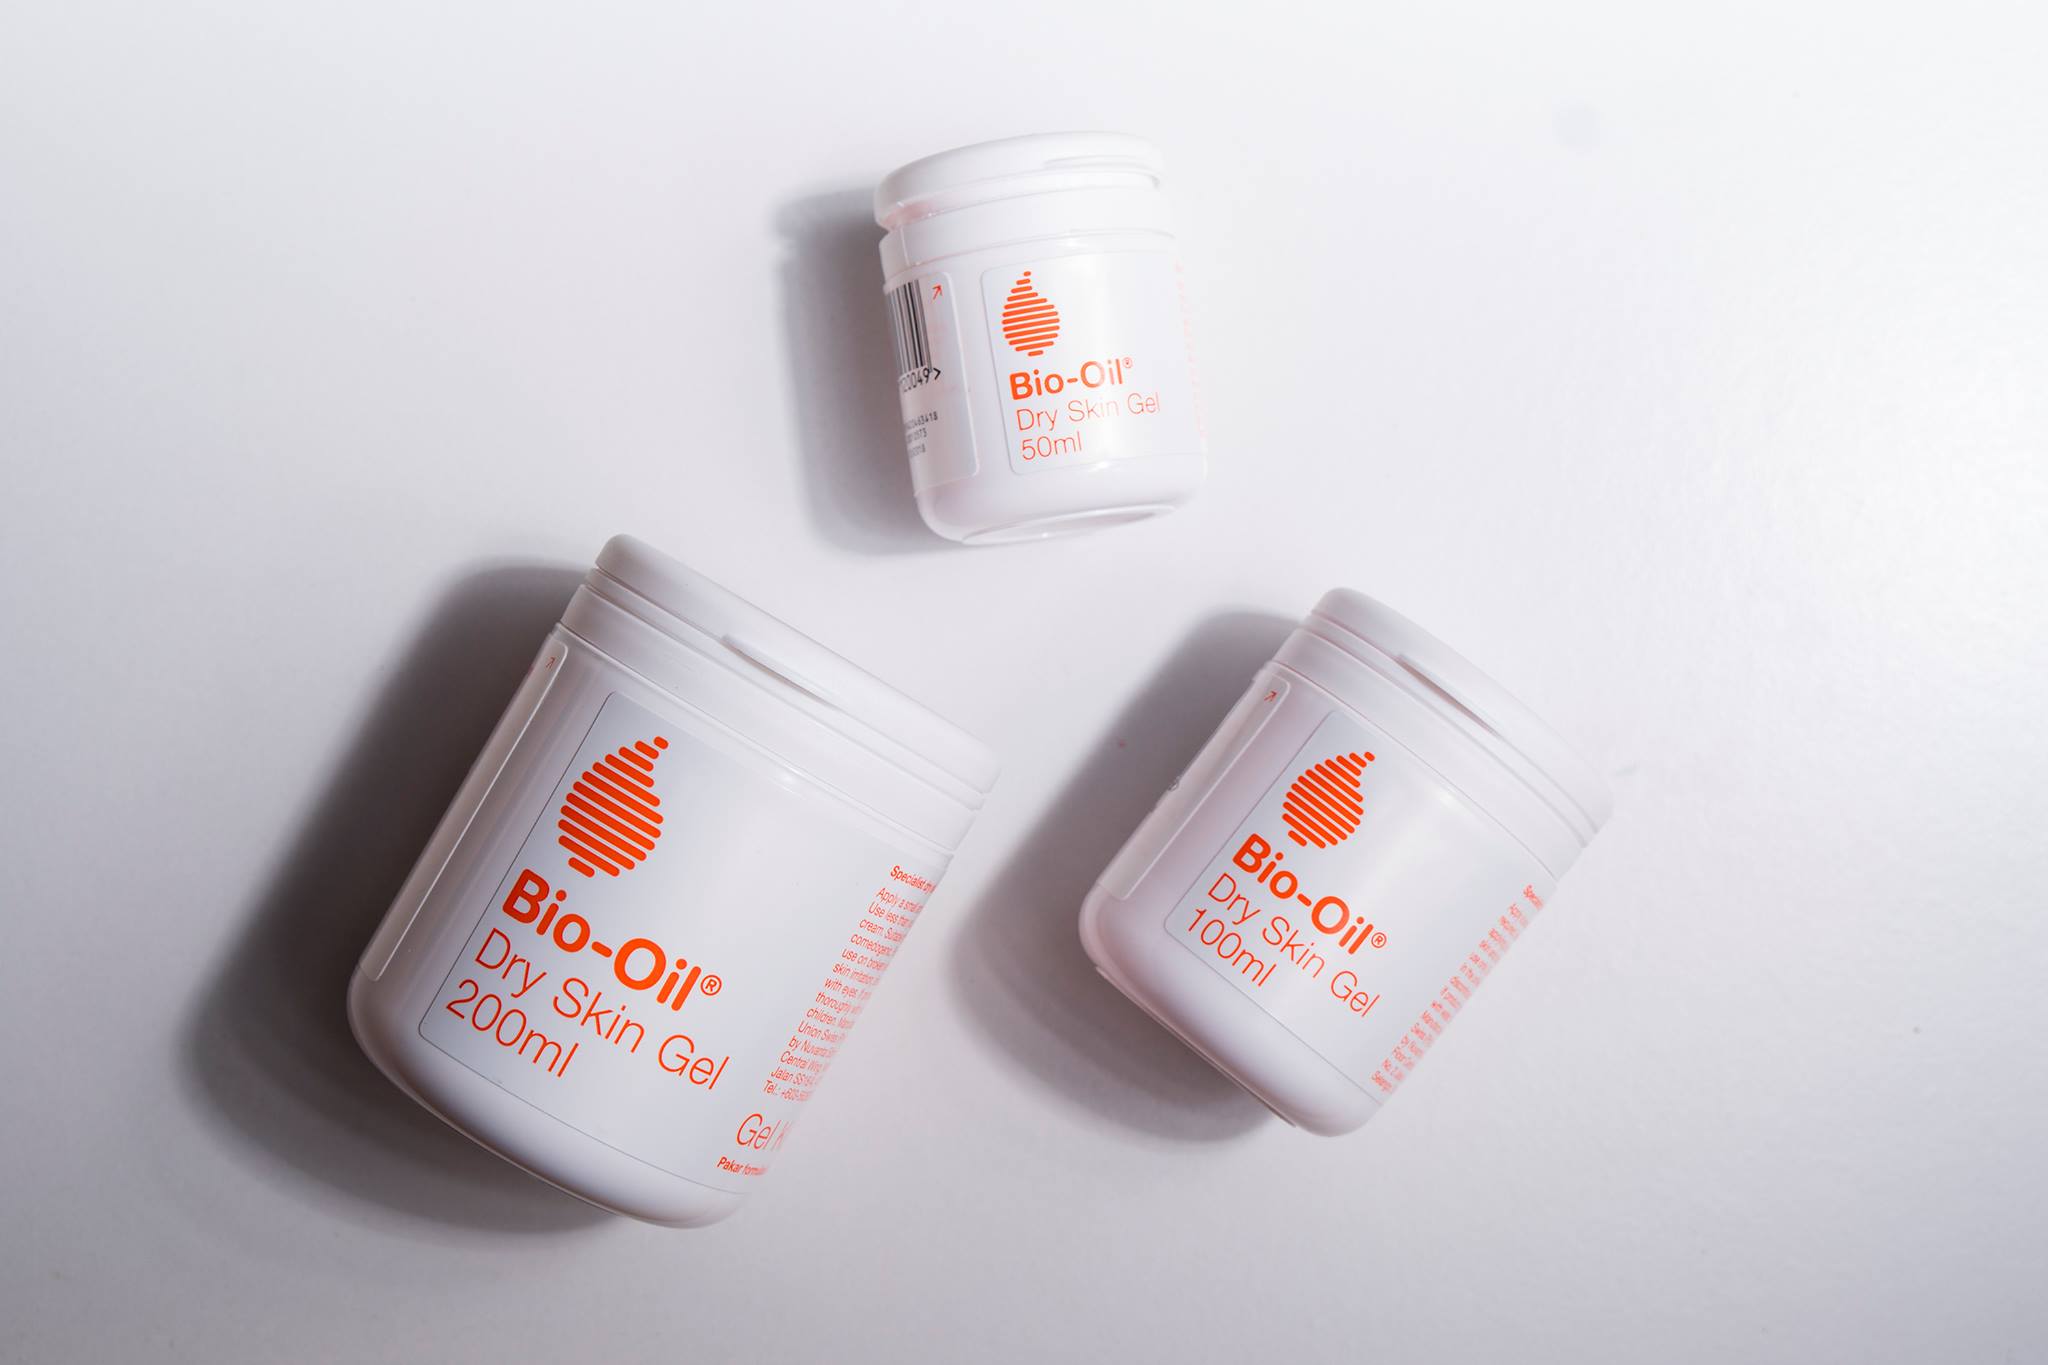 It comes in three sizes: 50ml, 100ml and 200ml. But all three are SMOL AF! Img from Bio-Oil Malaysia's Facebook